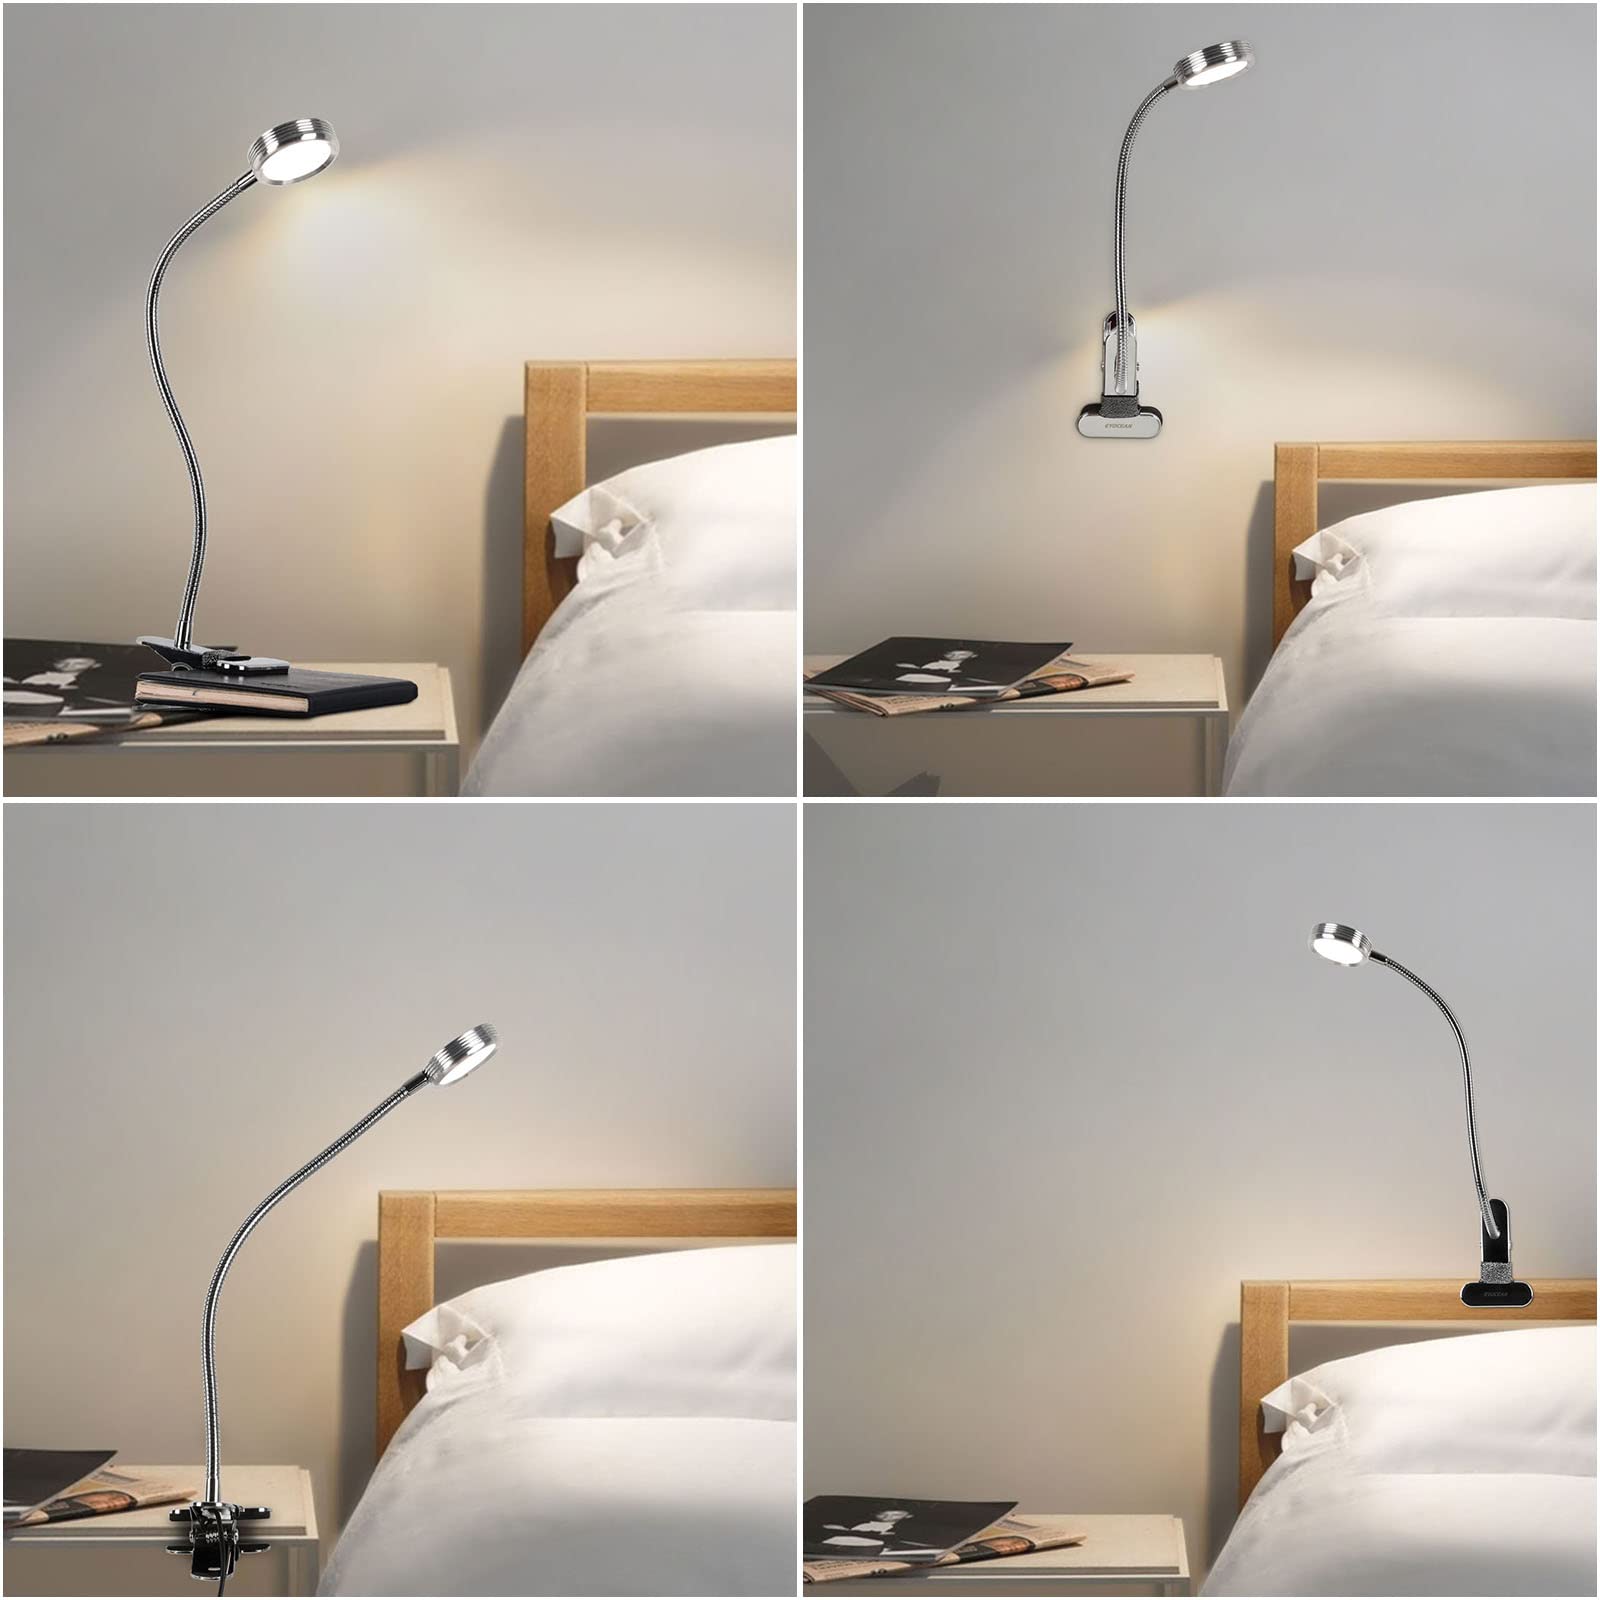 EYOCEAN LED Reading Light, Dimmable Clamp Light for Bed Headboard, Bedroom, Office, 3 Modes & 9 Dimming Levels, Flexible Clip Desk Lamp, Adapter Included, 5W, Silver